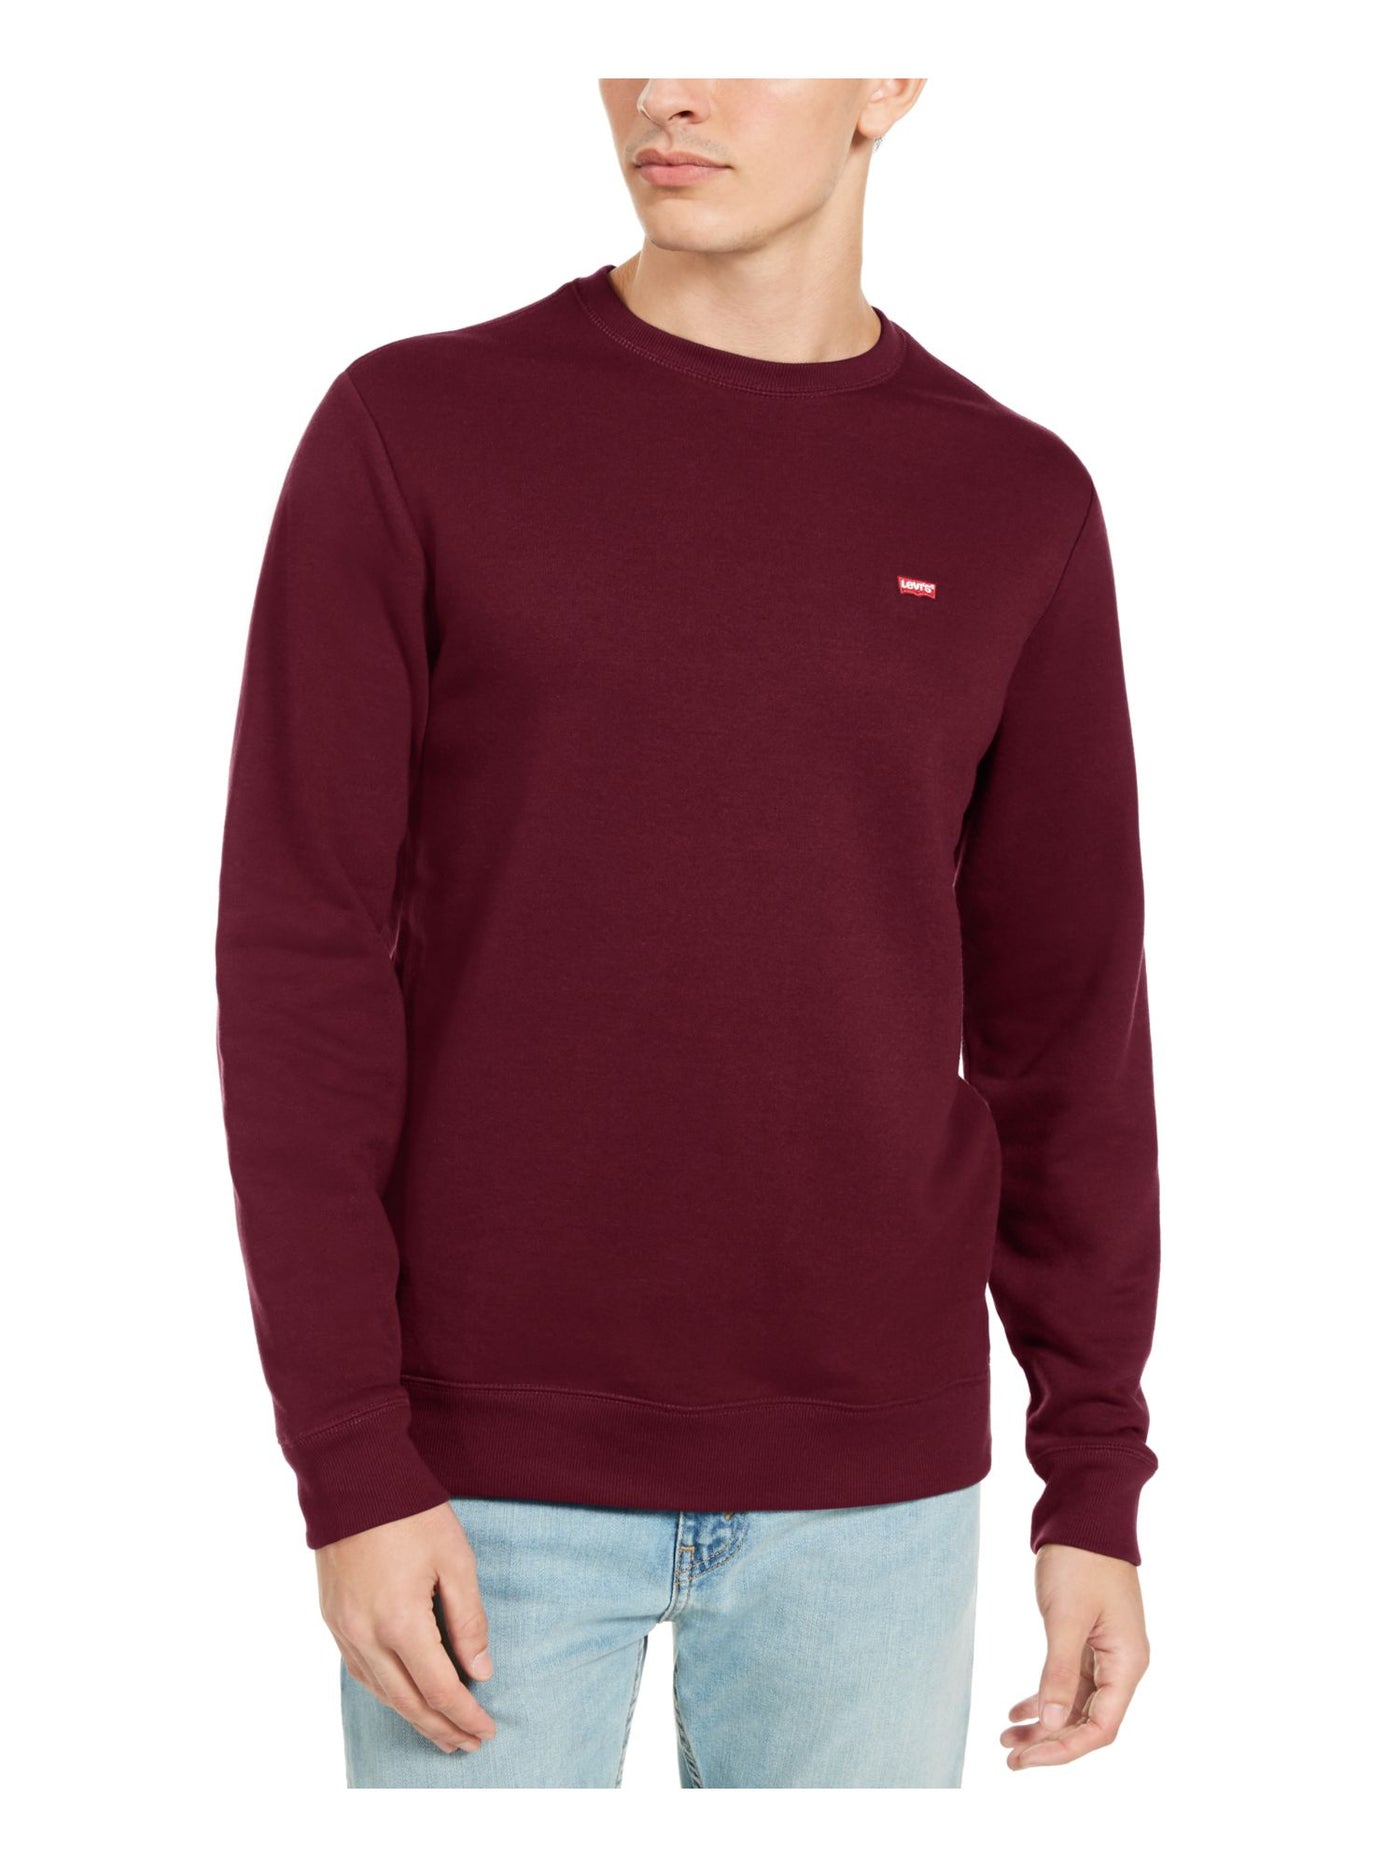 LEVI'S Mens Maroon Long Sleeve Crew Neck Fleece Lined Pullover Sweater XL